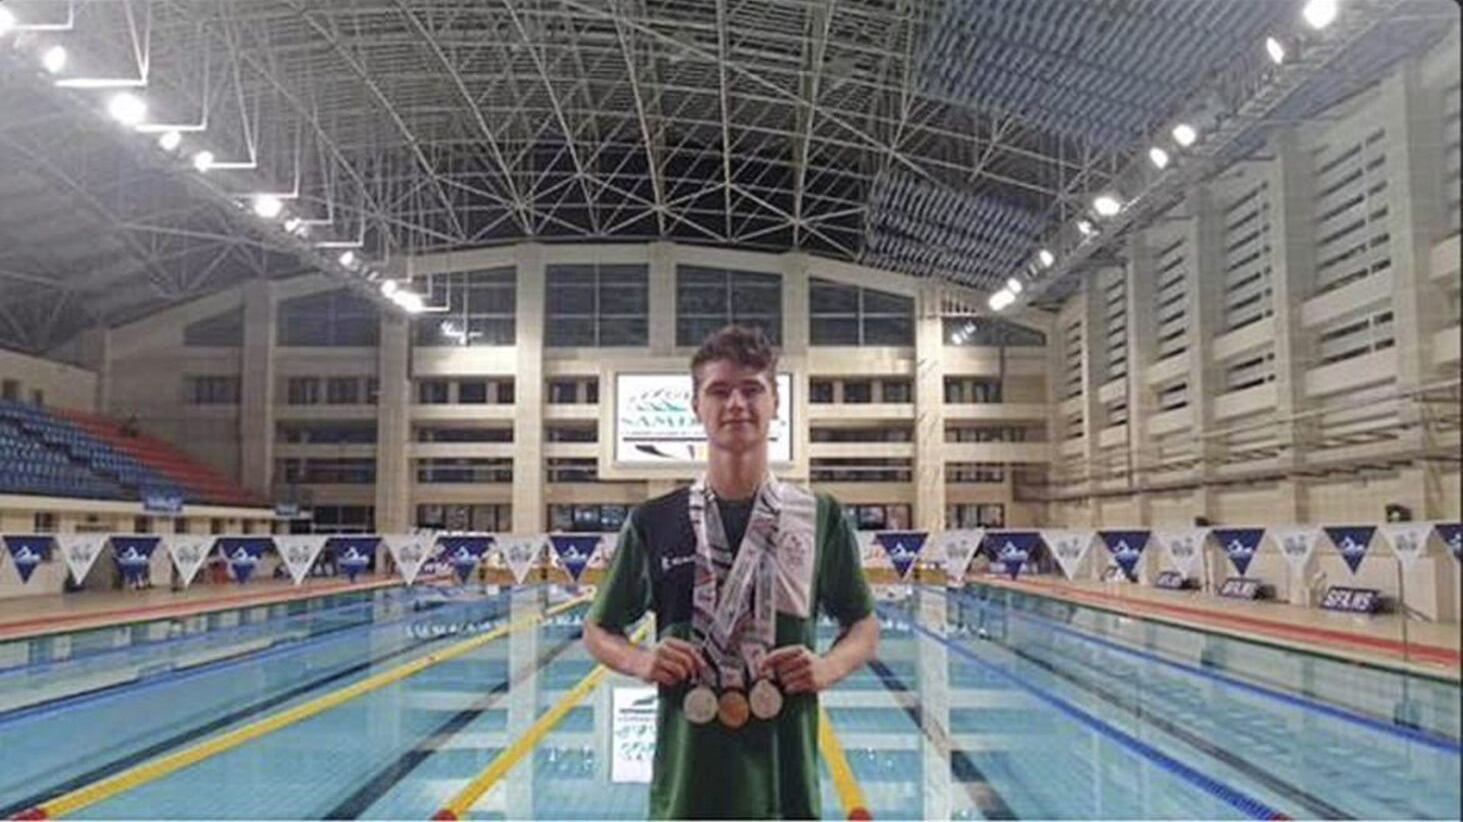 Conor Ferguson won three medals at the last Commonwealth Games in Samoa 